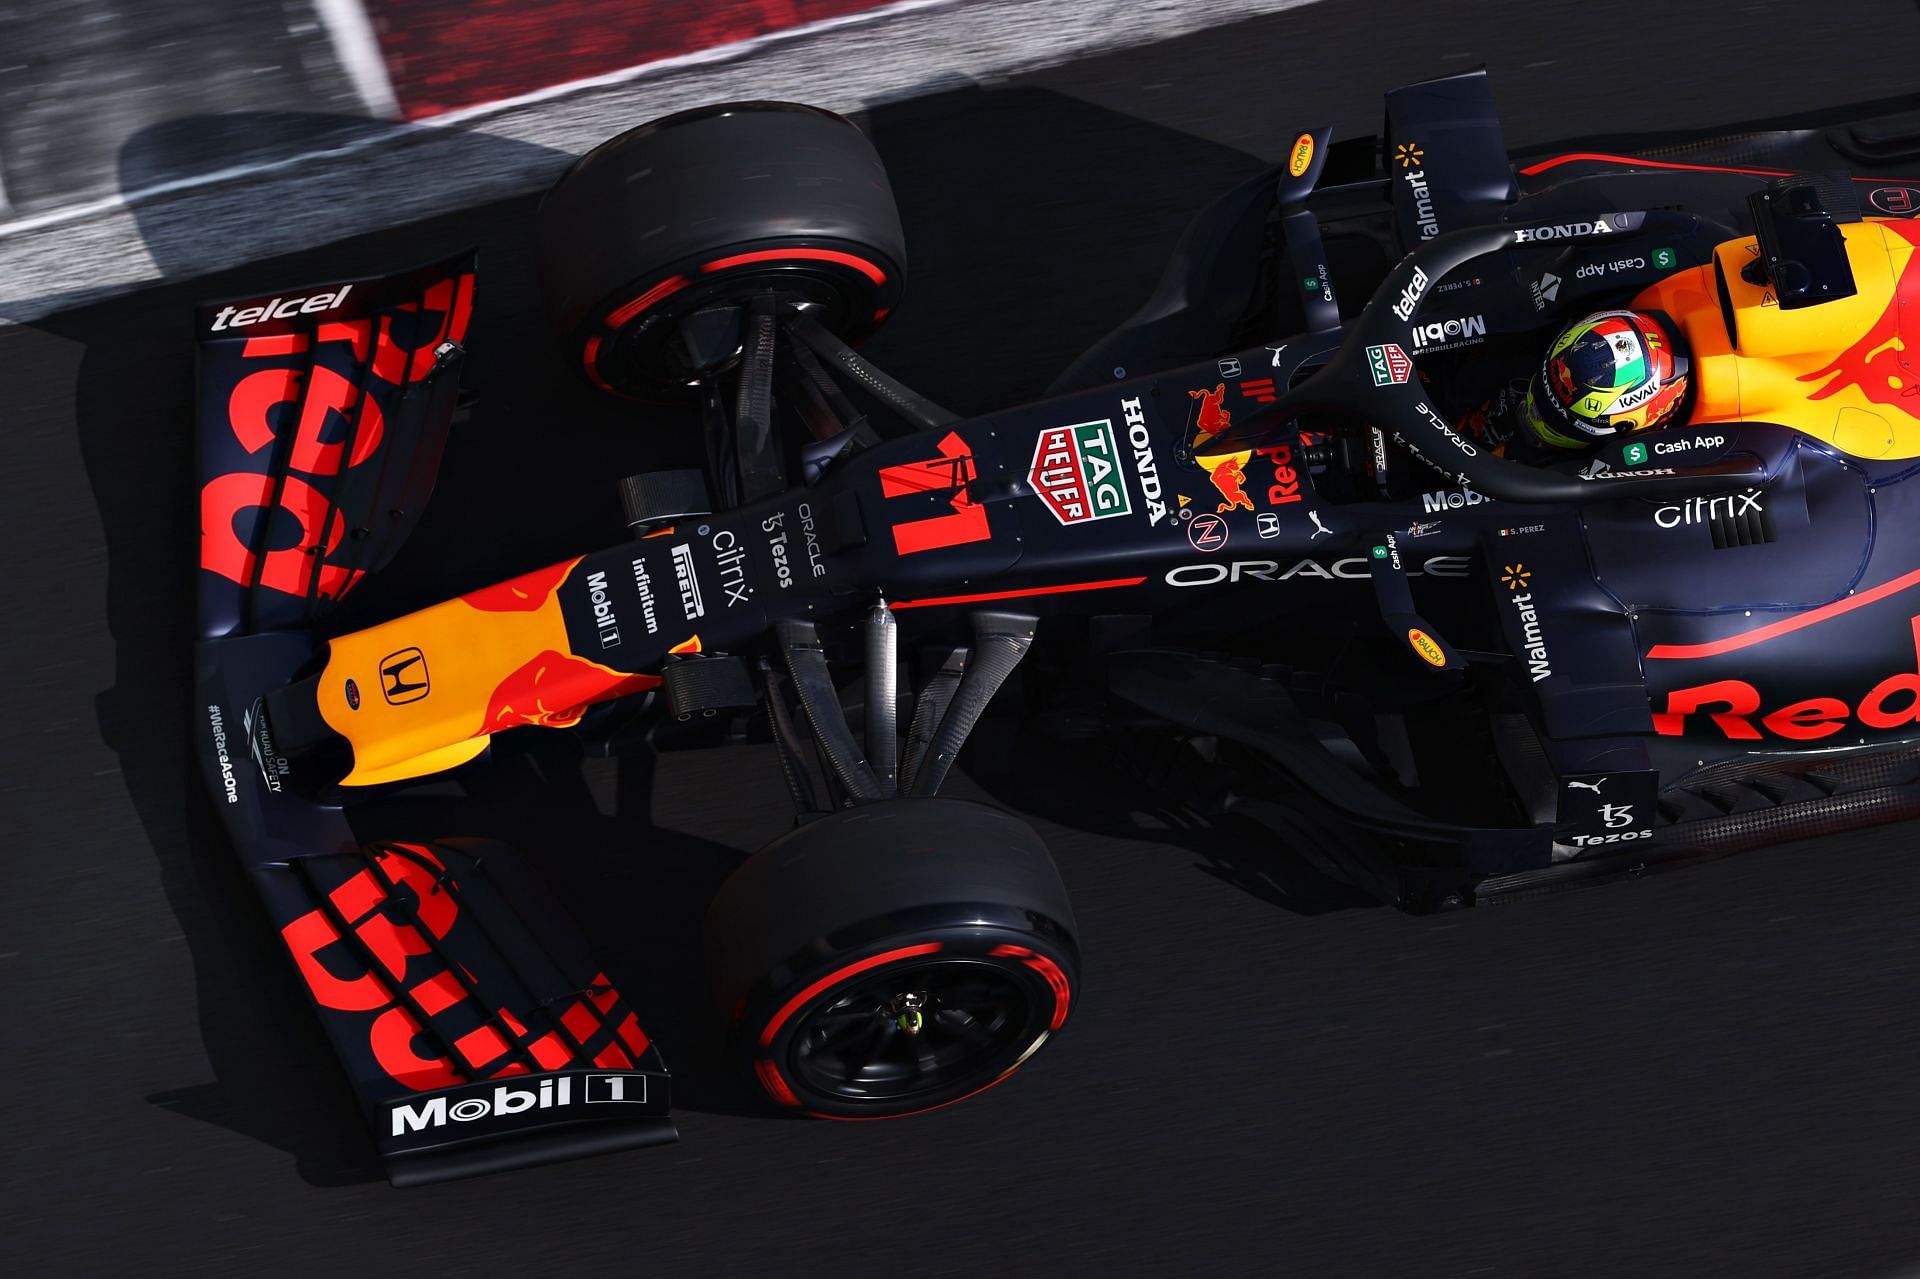 Formula 1 Testing in Abu Dhabi - The Red Bull of Sergio Perez, driven by a Honda engine